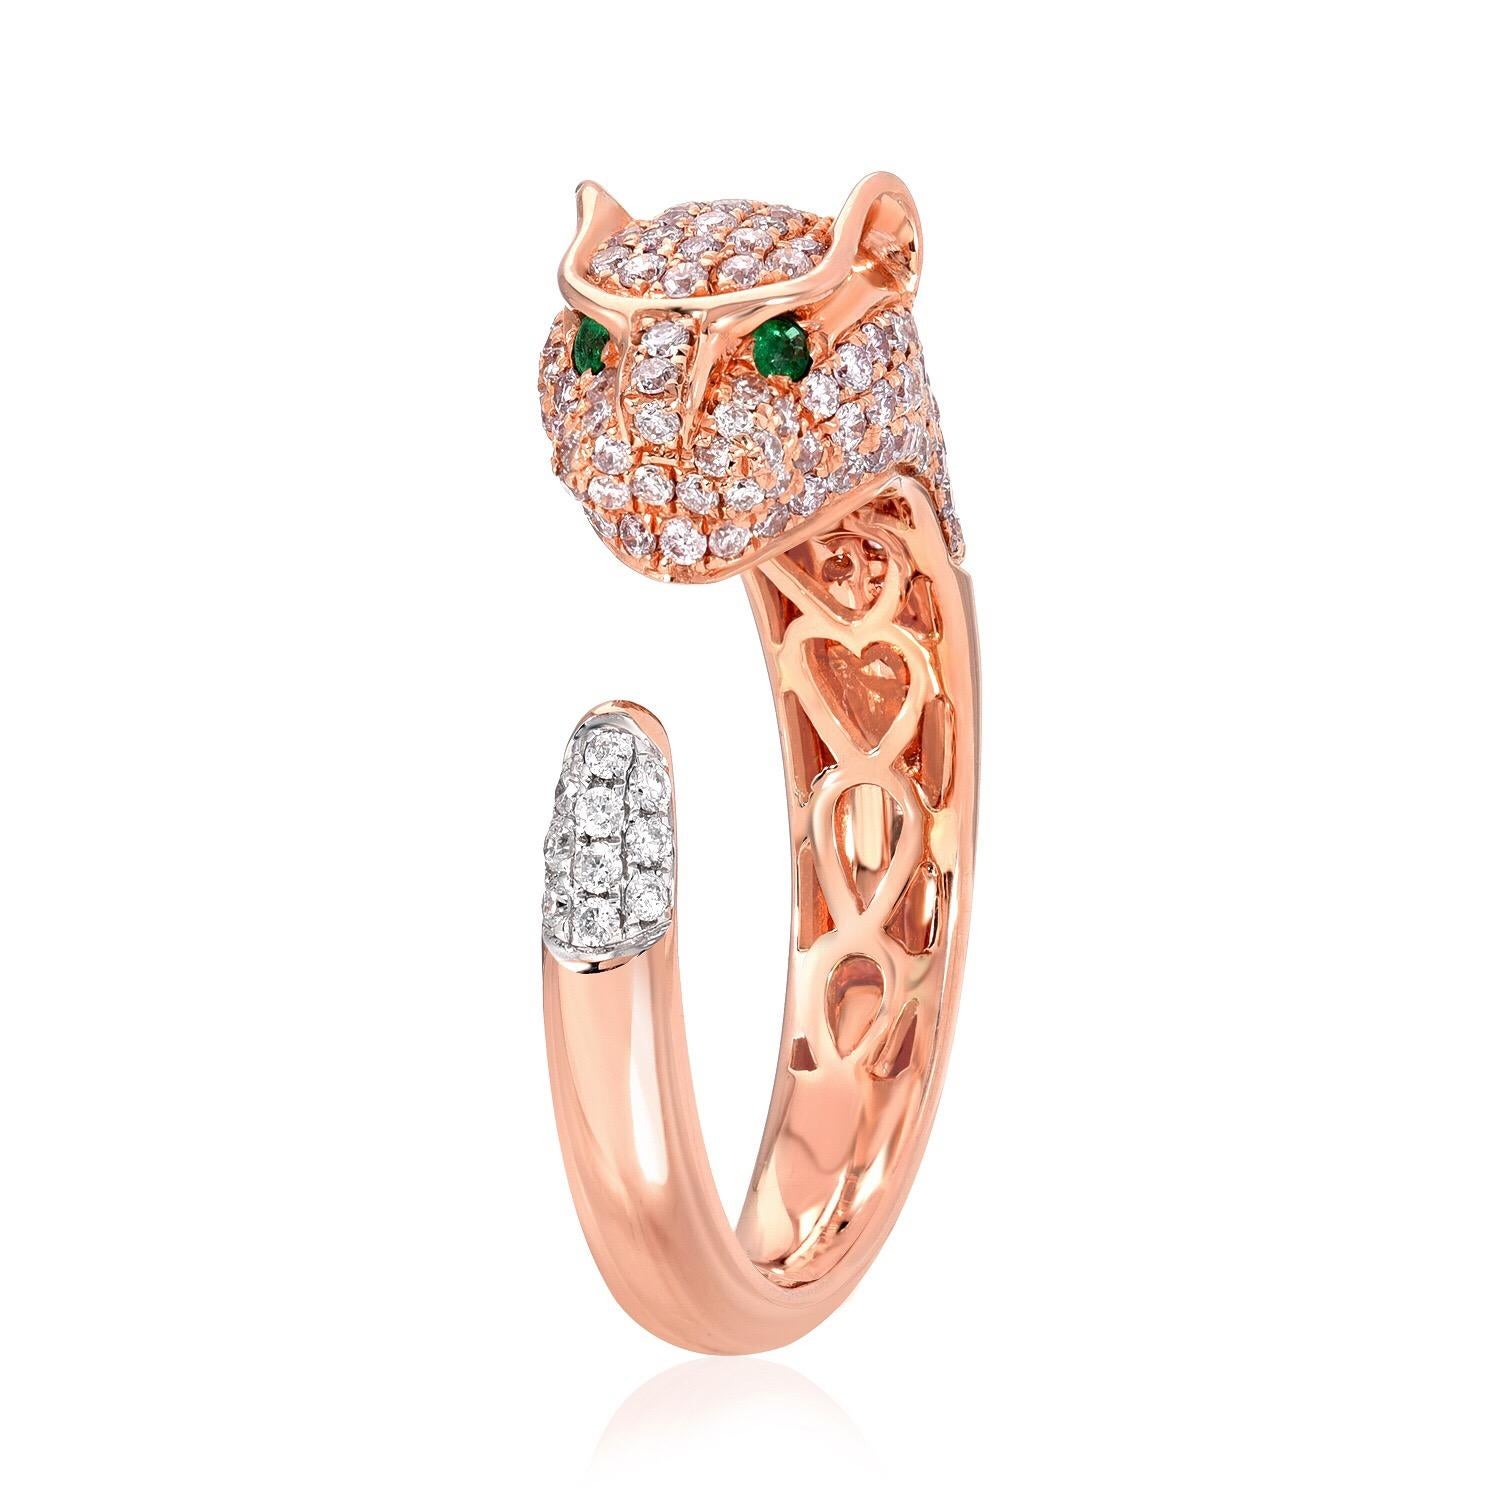 Panther ring mini, in 18K rose gold, set with a total of 162 natural pink round diamonds weighing 0.80 carats, 10 round white diamonds weighing 0.06 carats on the tail end, and 2 round emeralds weighing 0.02 carats in the eyes.
Panther ring size